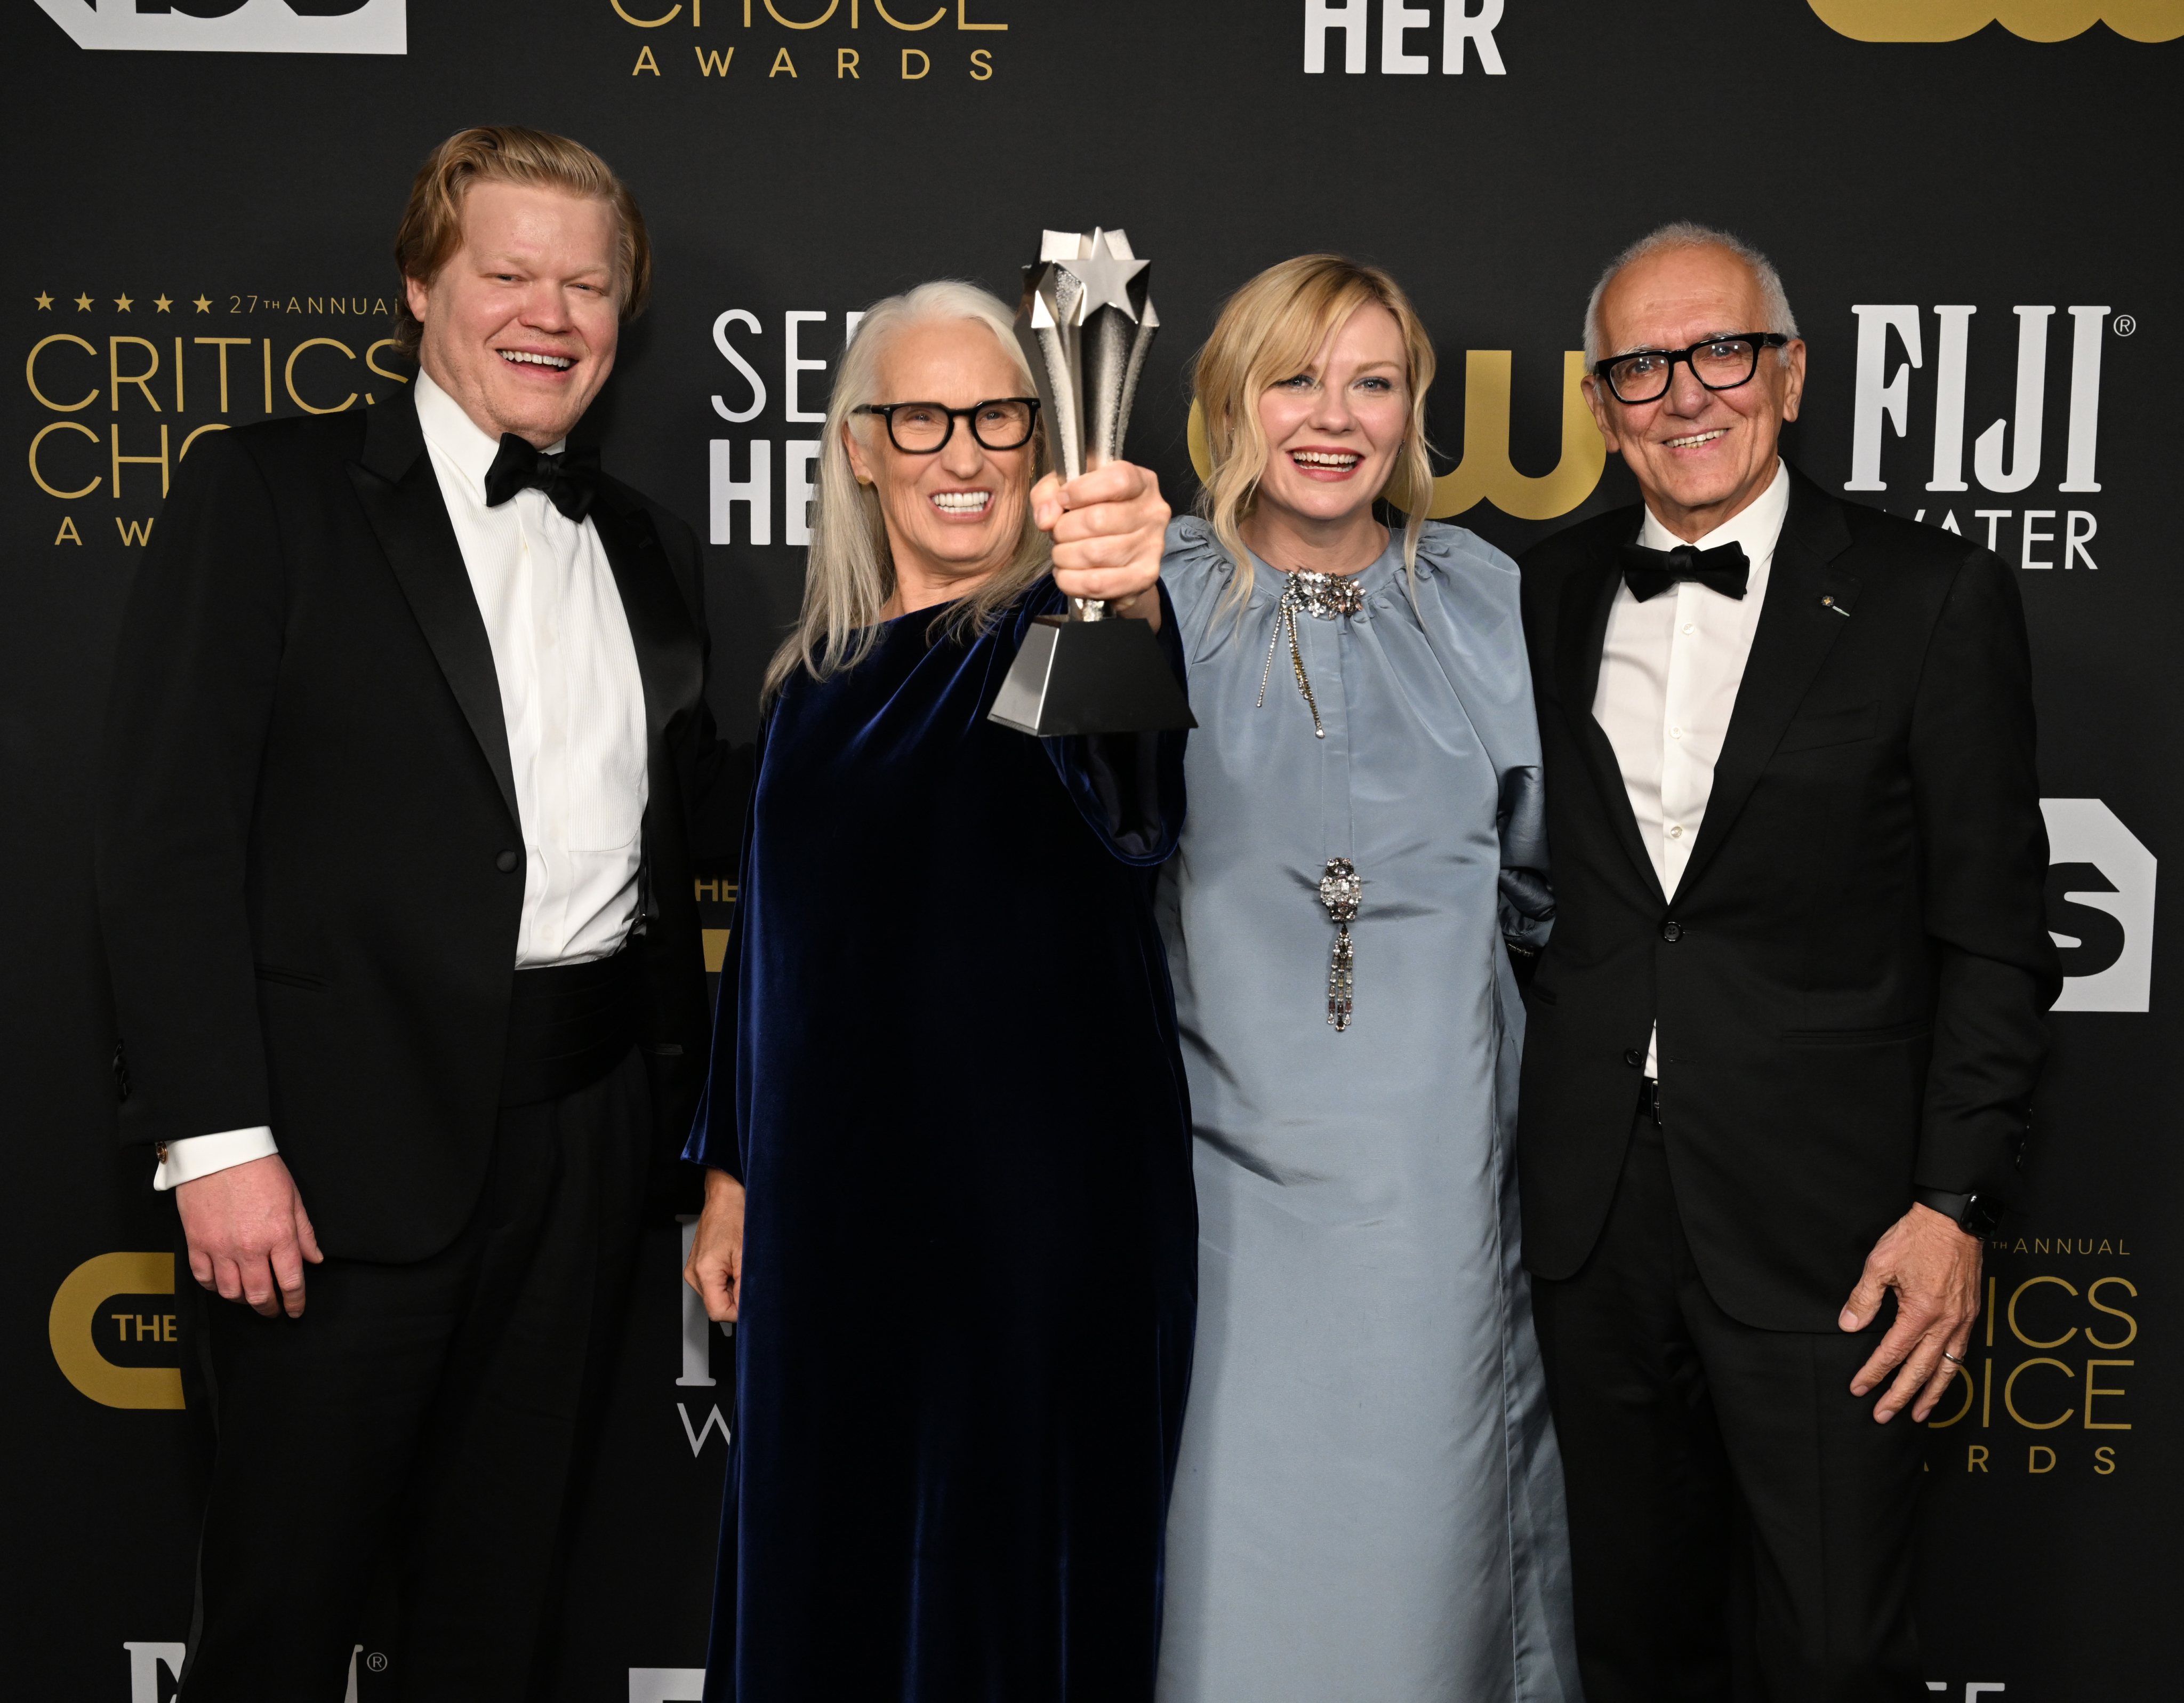 Champagne Collet &amp;amp; OBC Wines Celebrates The 27th Annual Critics Choice Awards